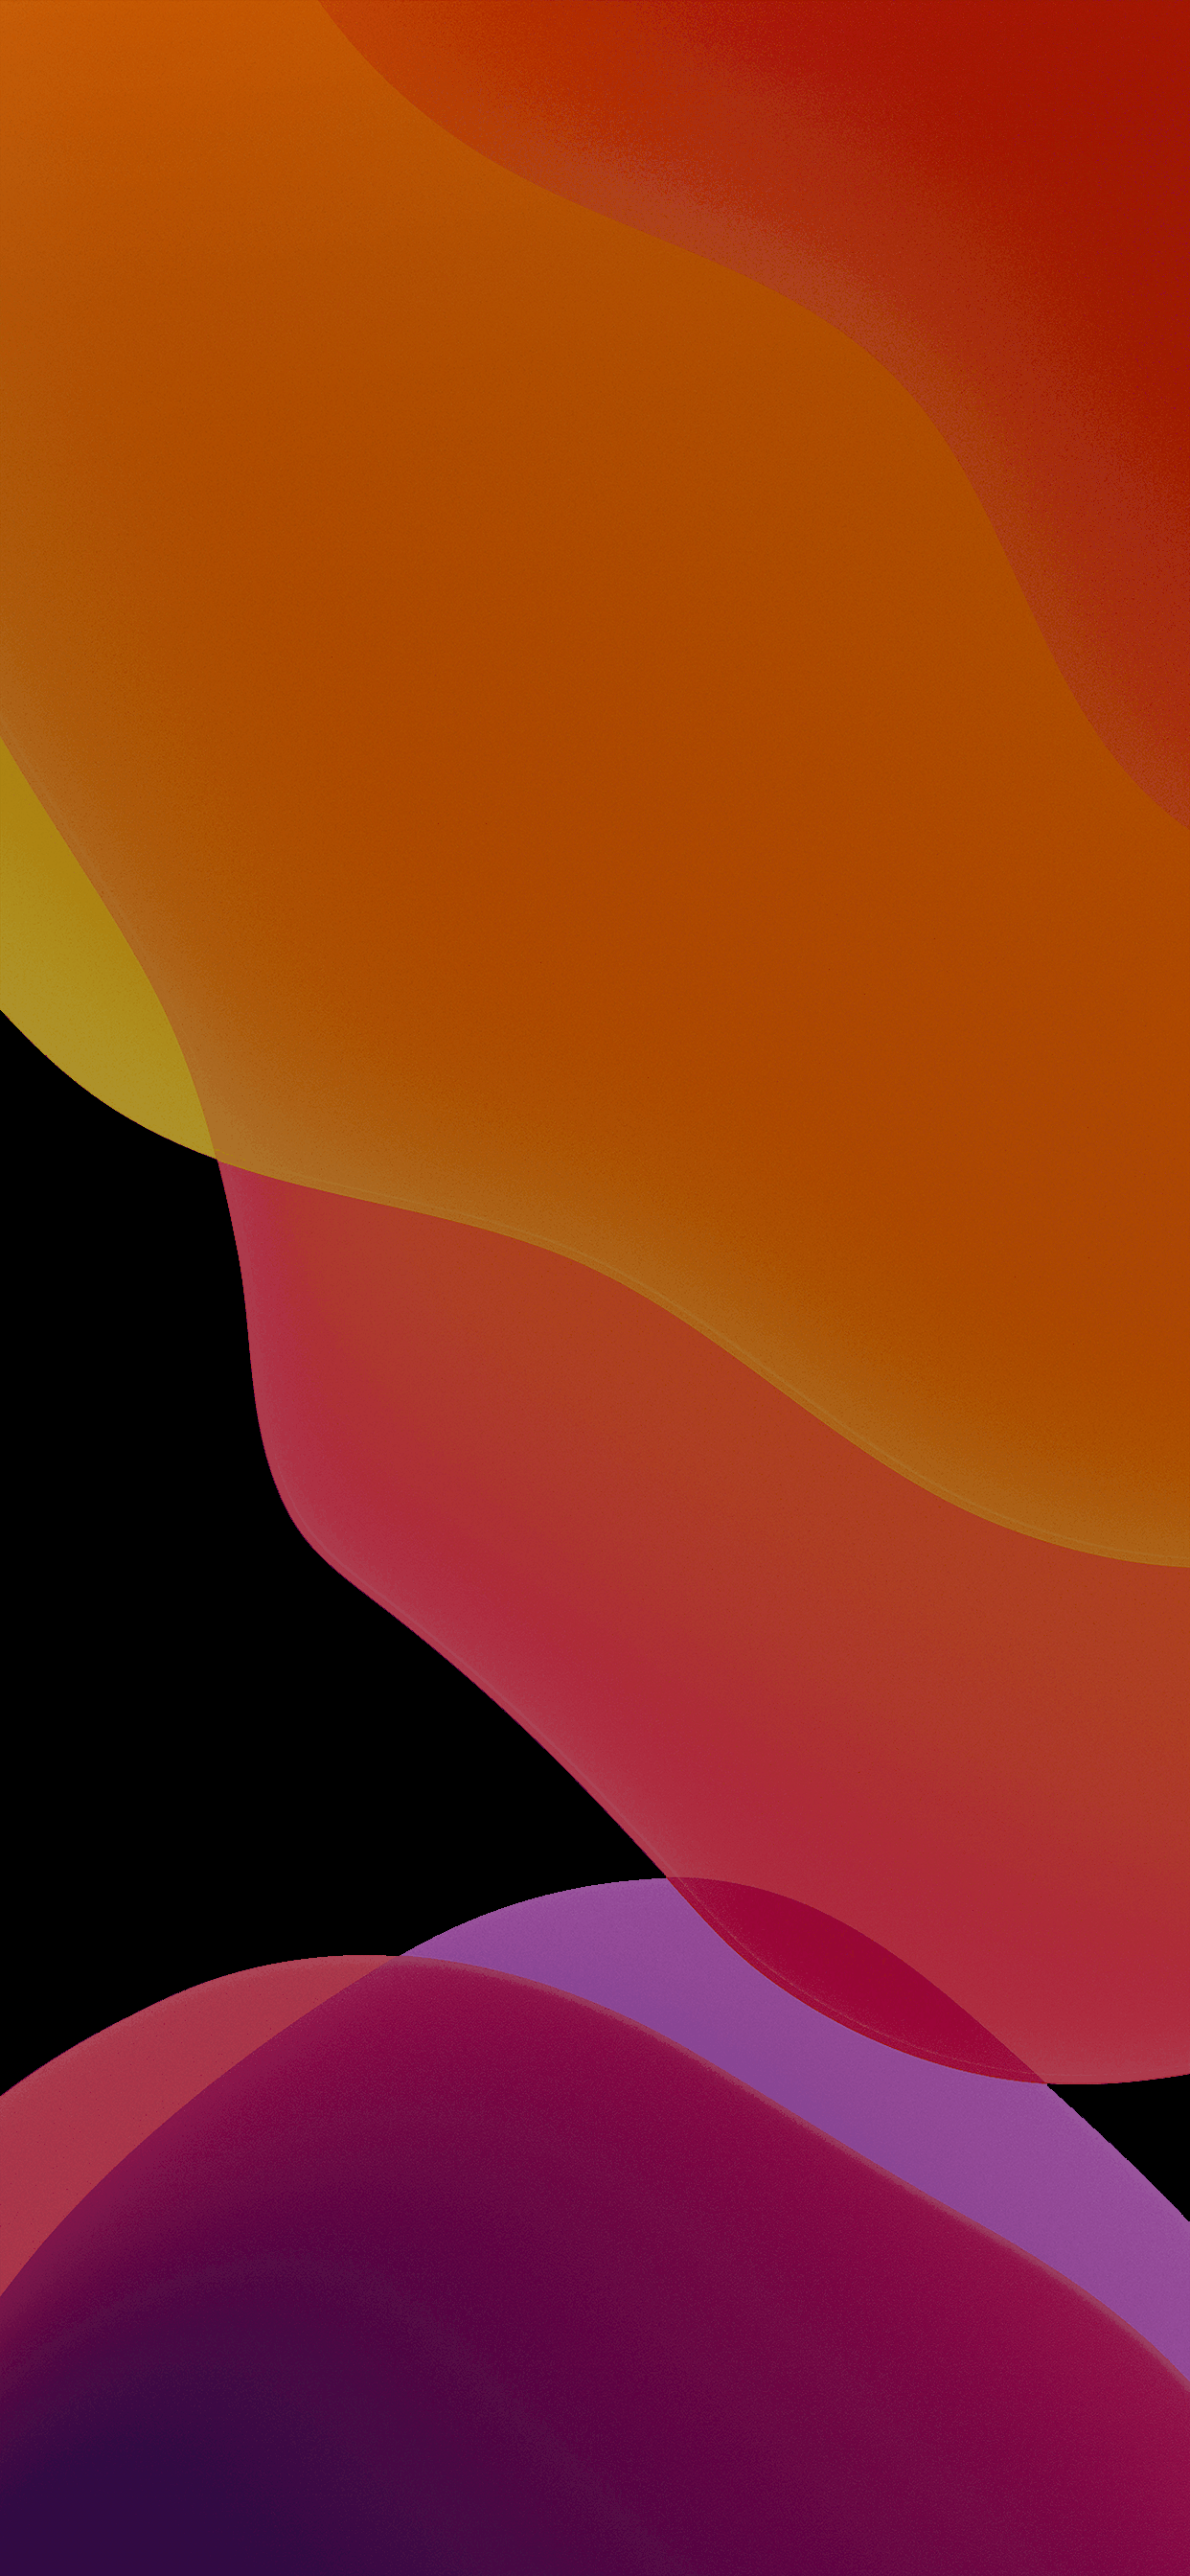 iOS 13 Official Wallpapers - Wallpaper Cave